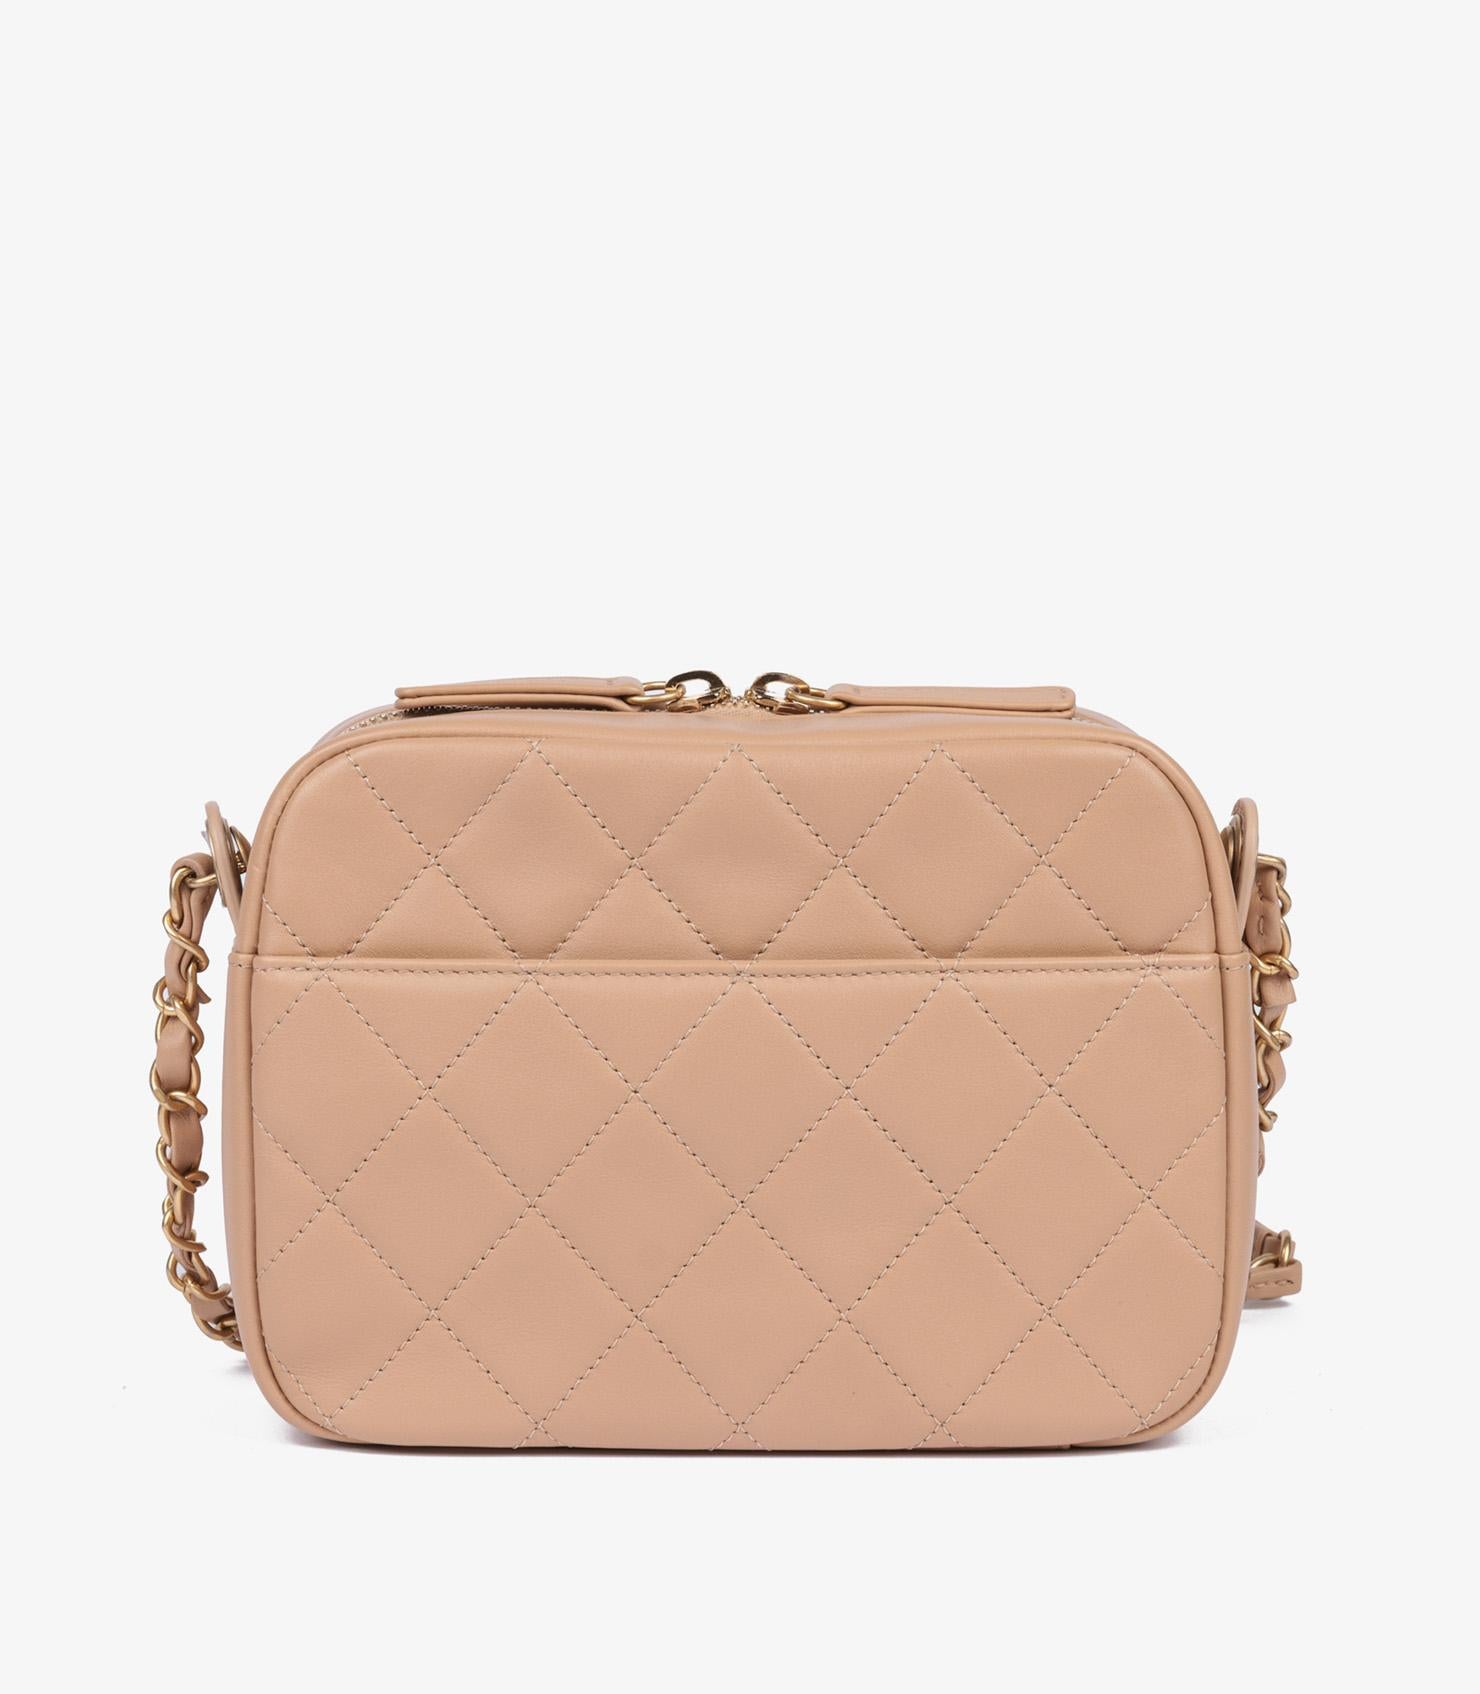 Chanel Beige Quilted Lambskin Enchained Camera Bag For Sale 2